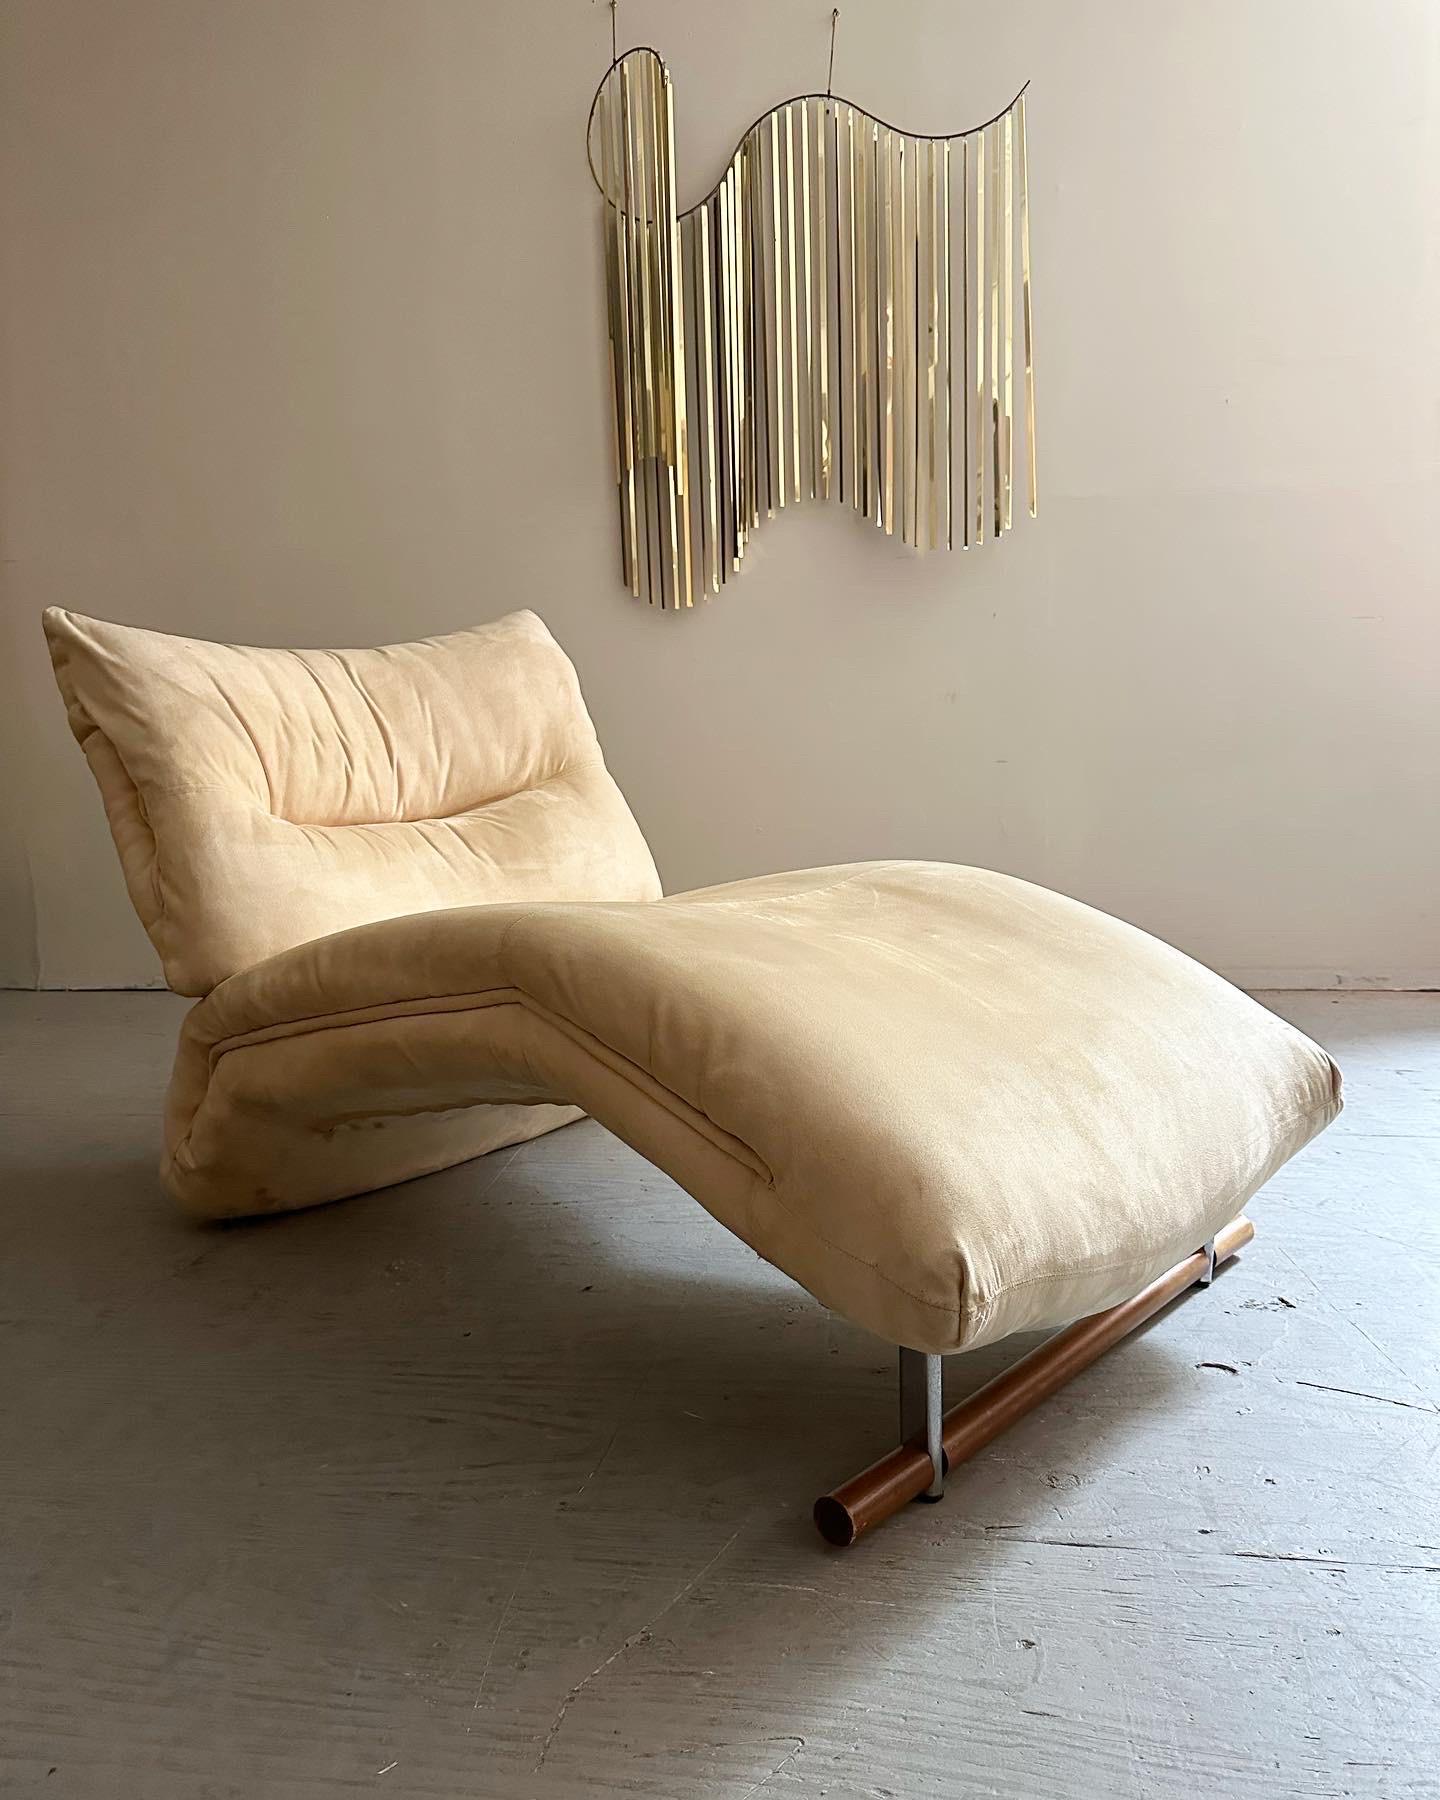 This beautifully designed french style chaise lounge features original beige suede upholstery with unique welt detailing. The chaise rests on a solid wood beam with chrome supports. Sure to be a standout addition to any modern living space.